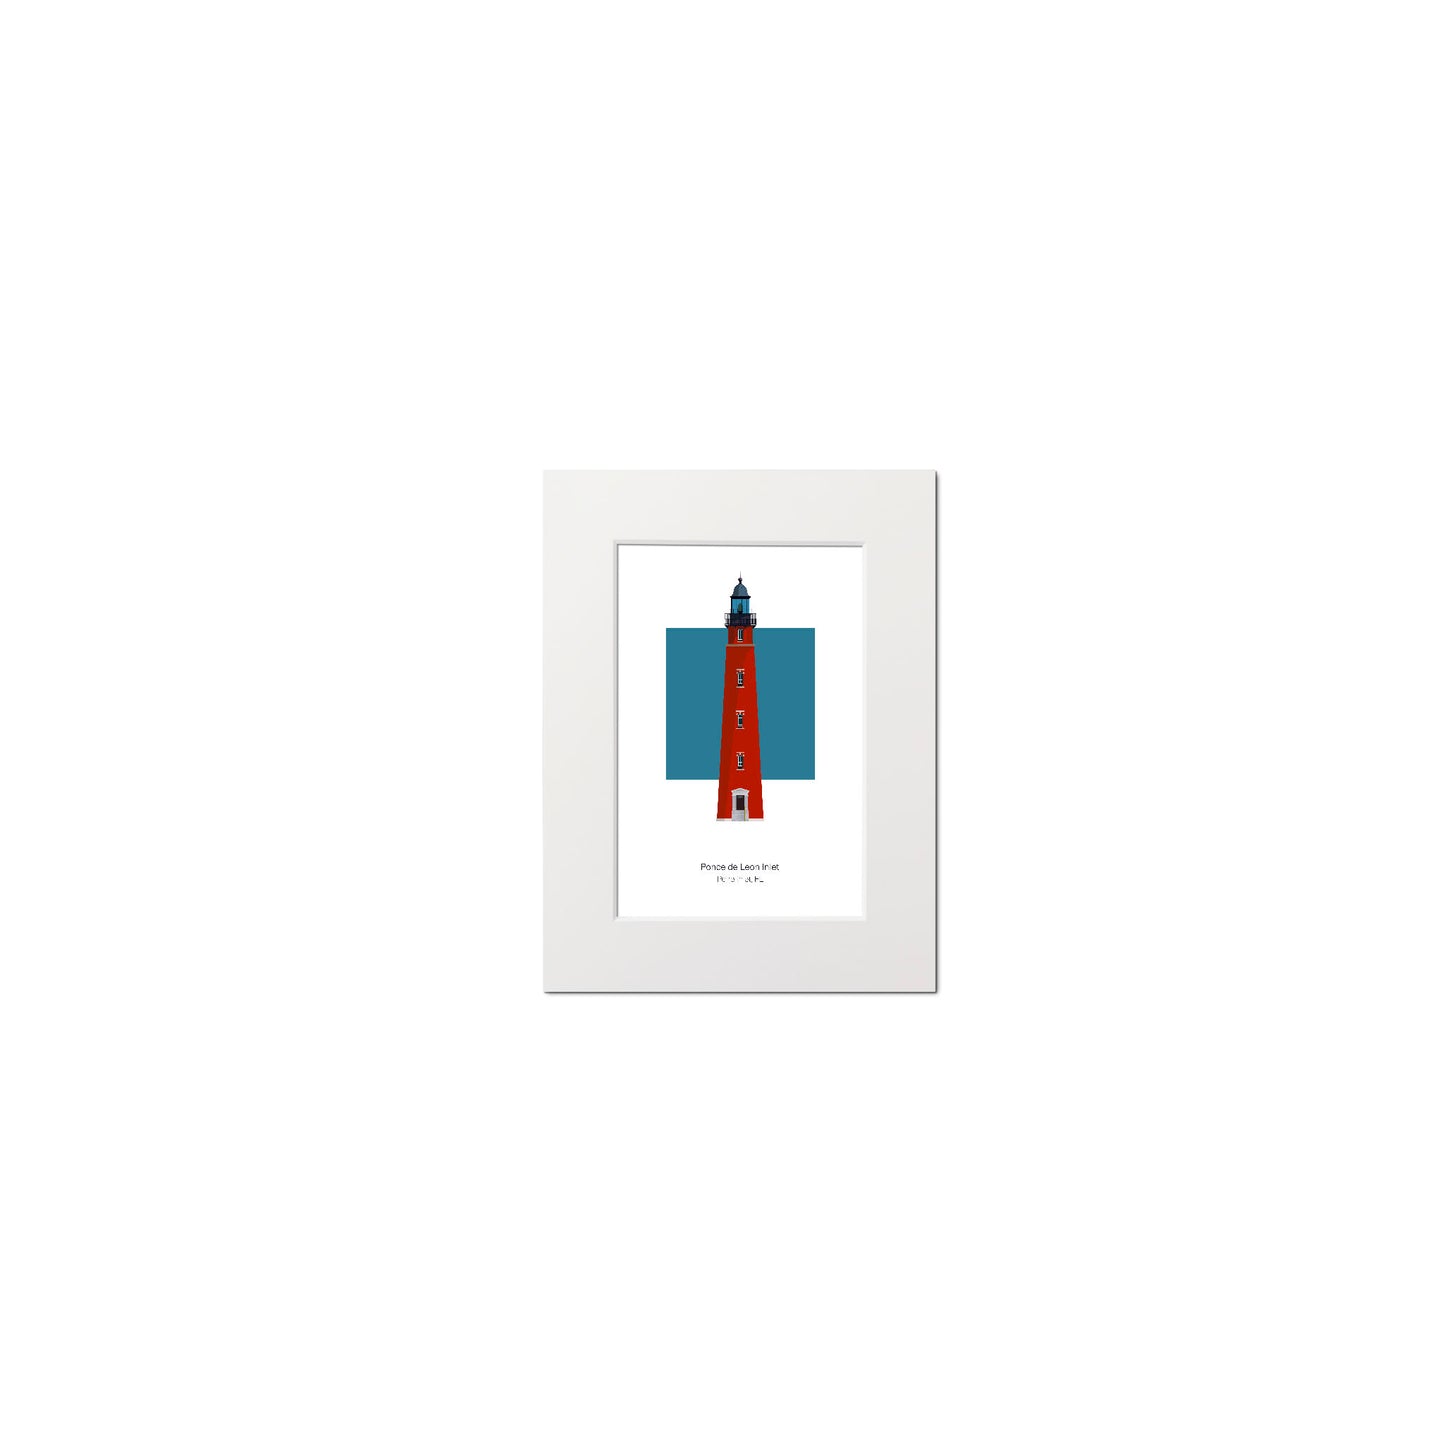 Illustration of the Ponce de Leon Inlet lighthouse, Florida, USA. On a white background with aqua blue square as a backdrop., mounted and measuring 6"x8" (15x20cm).